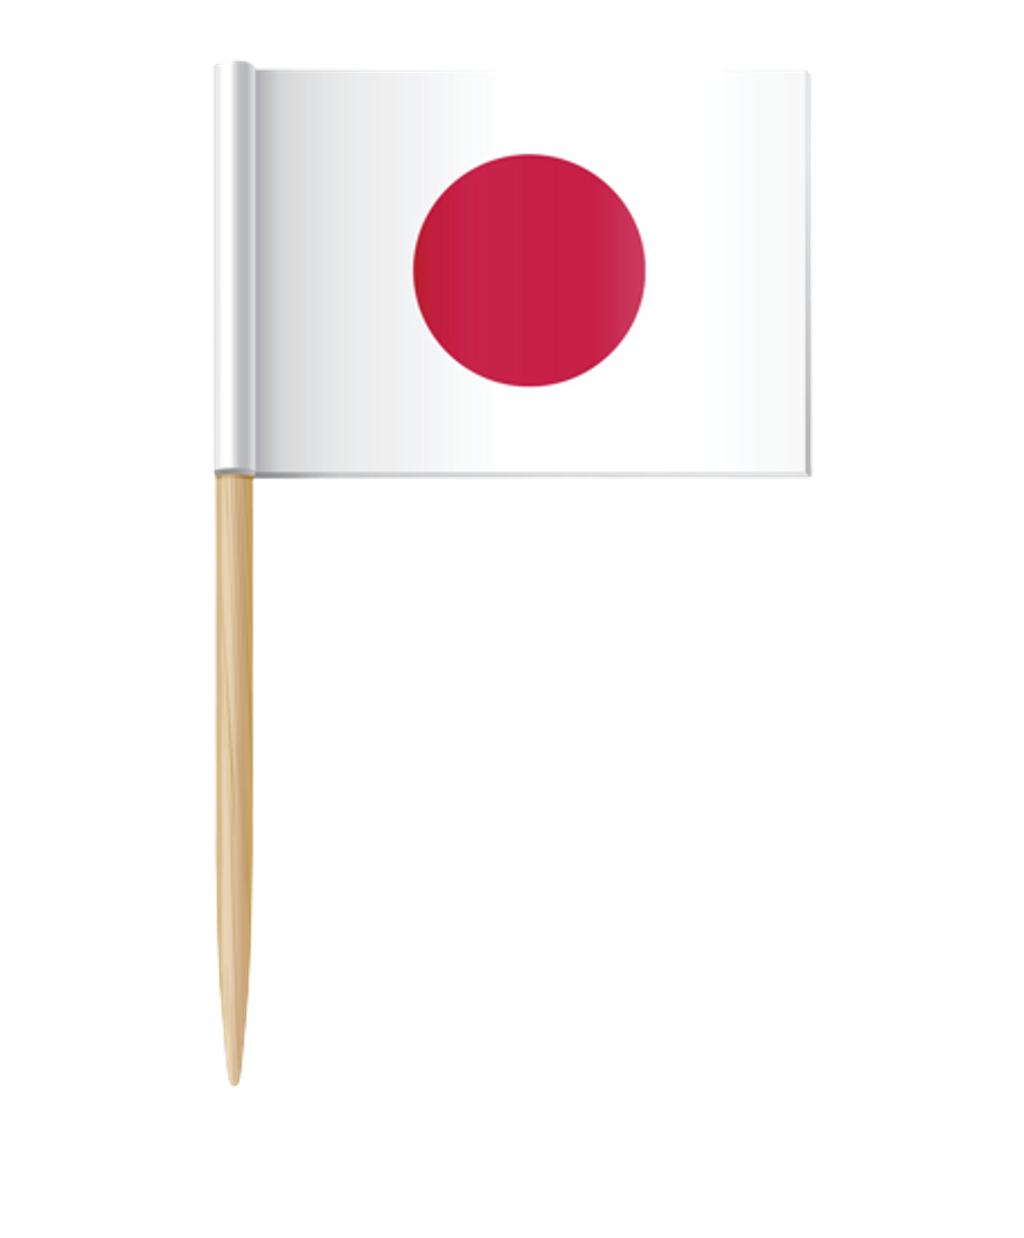 japanese-flag-toothpick-vector-596260-removebg-preview